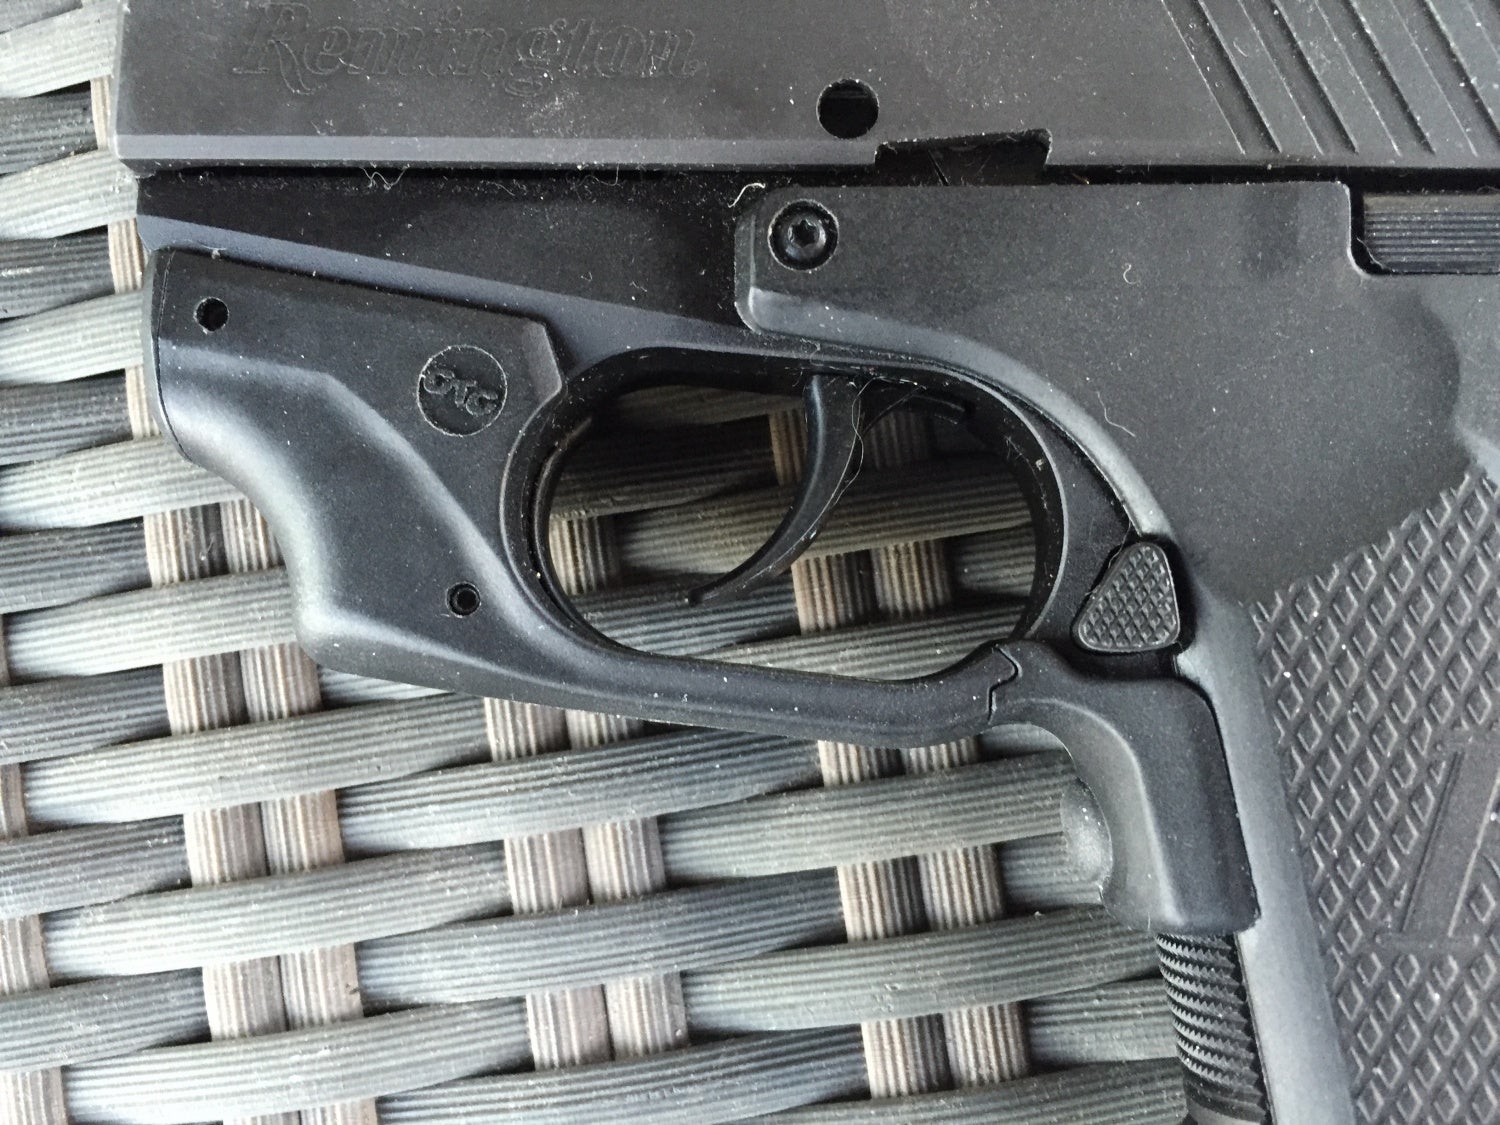 This shows the activation button and fit of the laser. The right side magazine release is also seen. The pistol has true ambi magazine releases